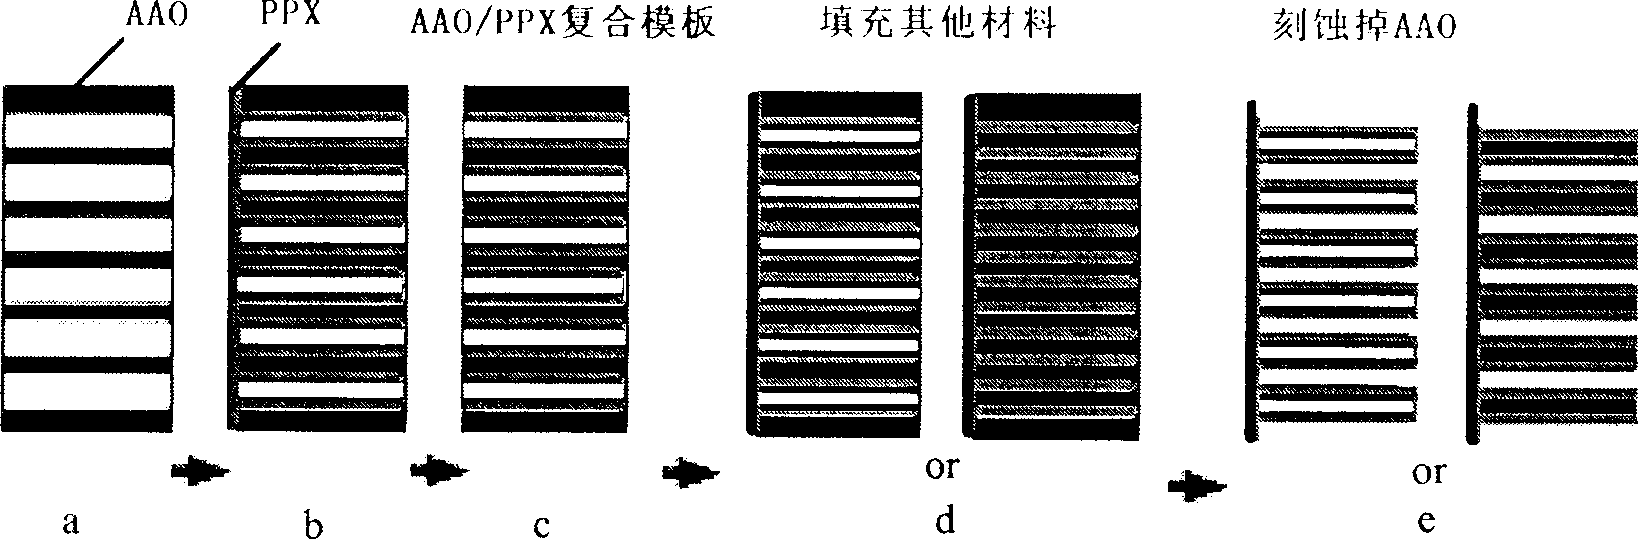 Preparation method of nano-grade capsule material based on composite mould plate technology